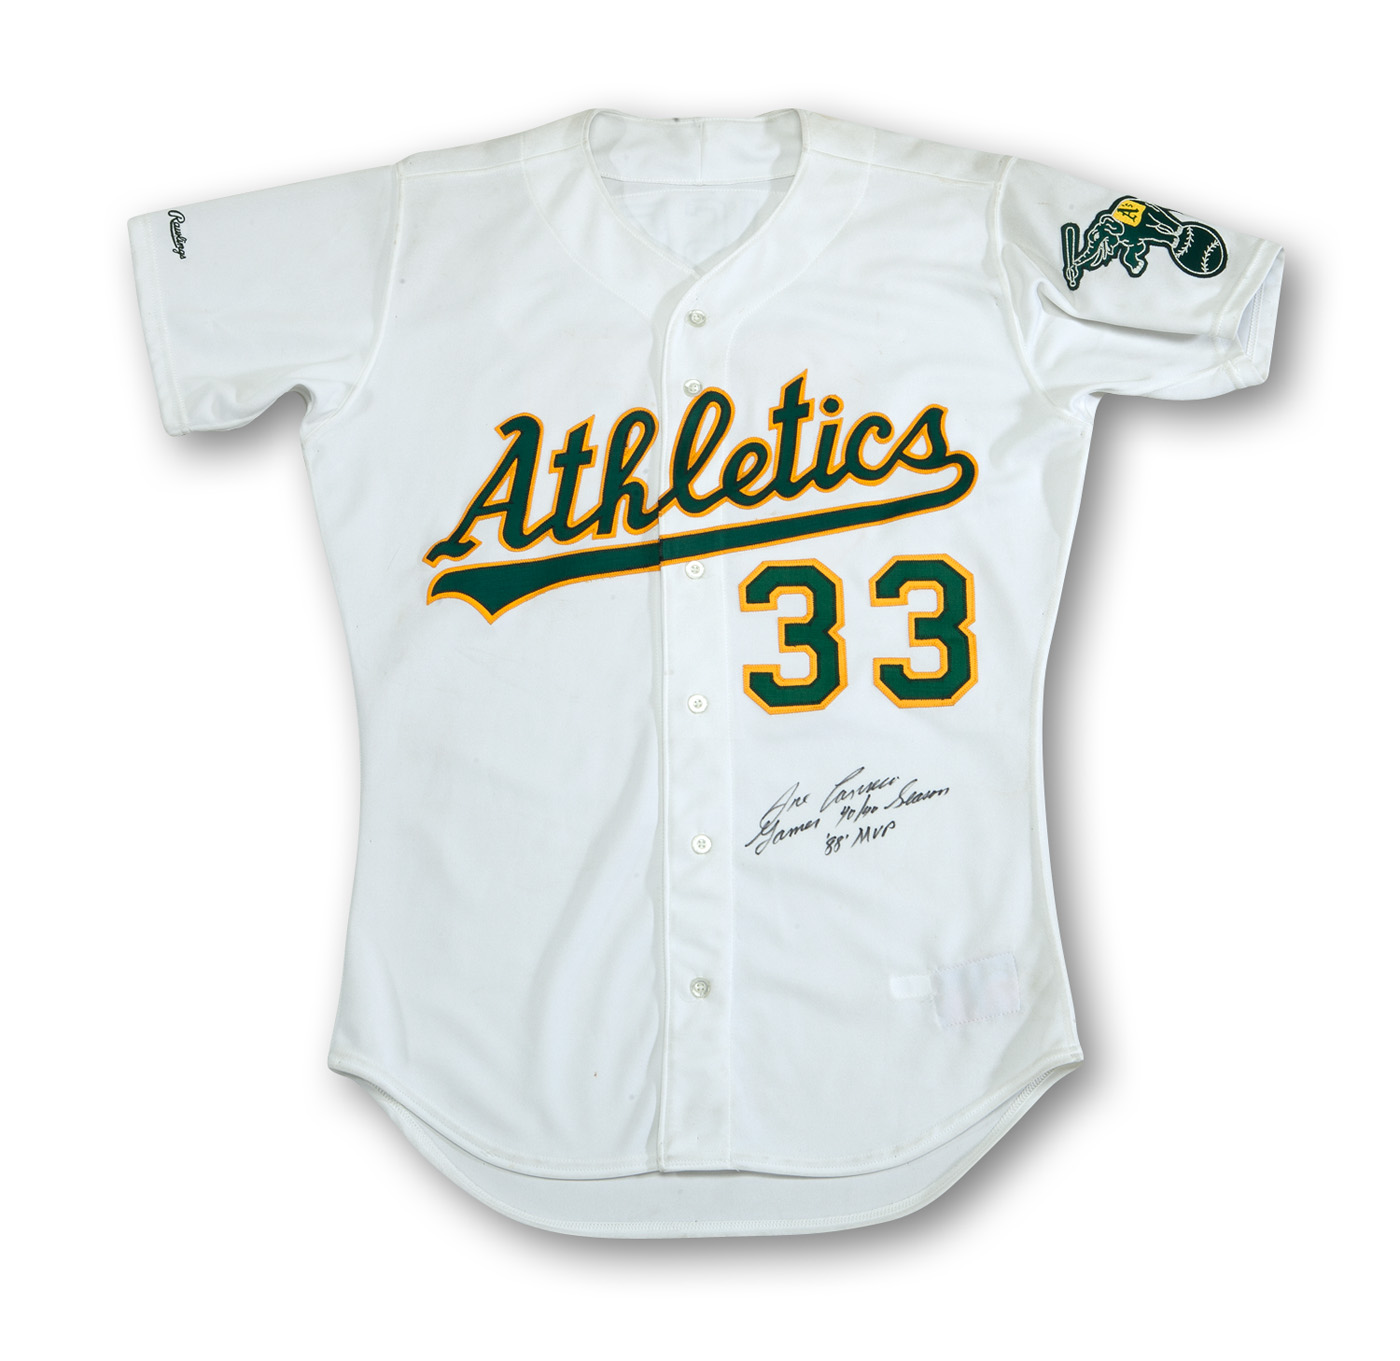 At Auction: MLB Oakland A's #33 Canseco Nike Stitched Green Jersey - Small